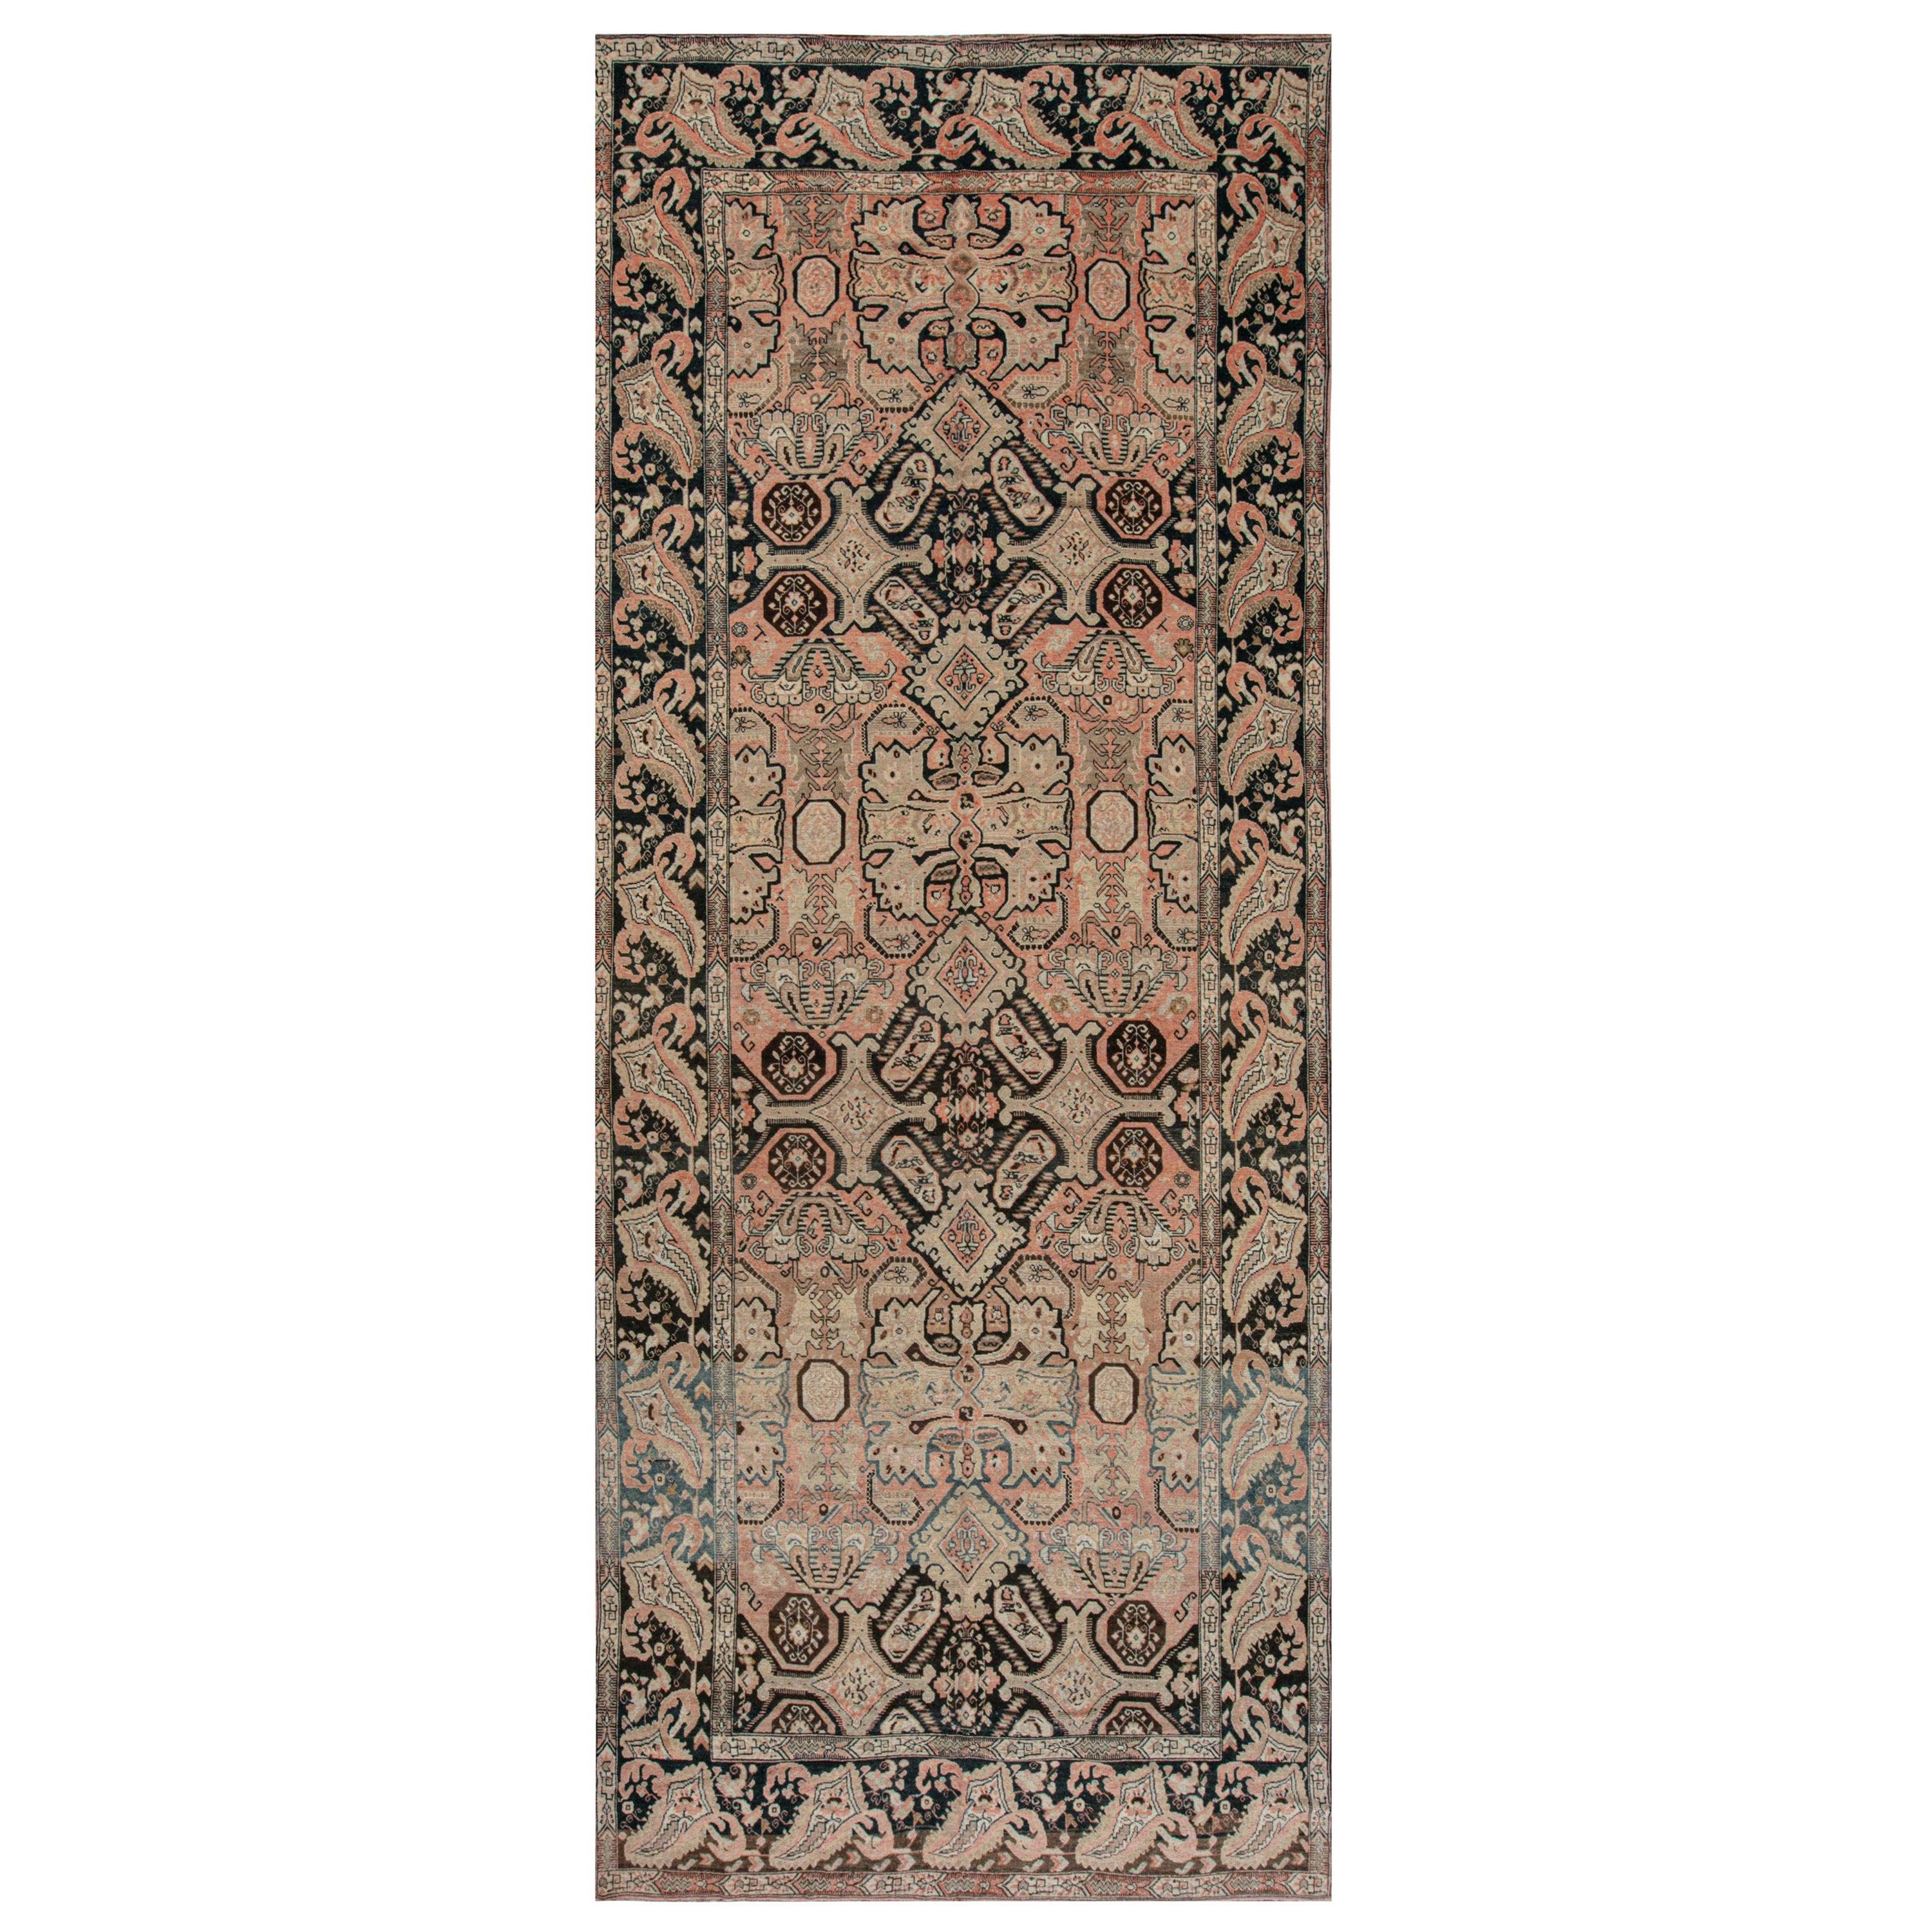 Authentic 1900s Karabagh Bold Design, How To Use A 5×7 Rug